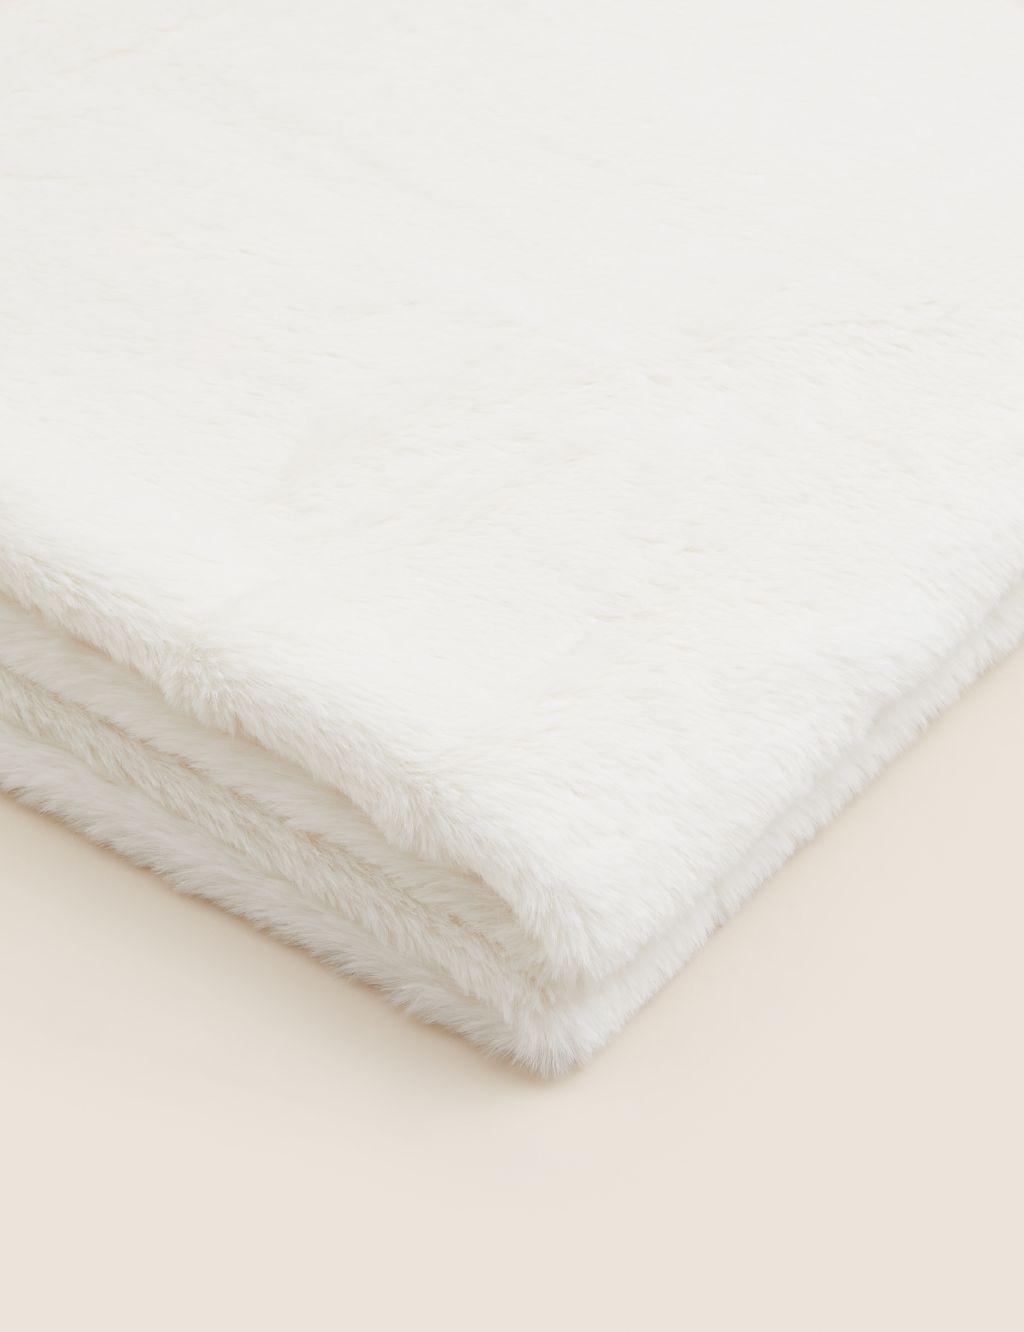 Supersoft Faux Fur Throw image 3